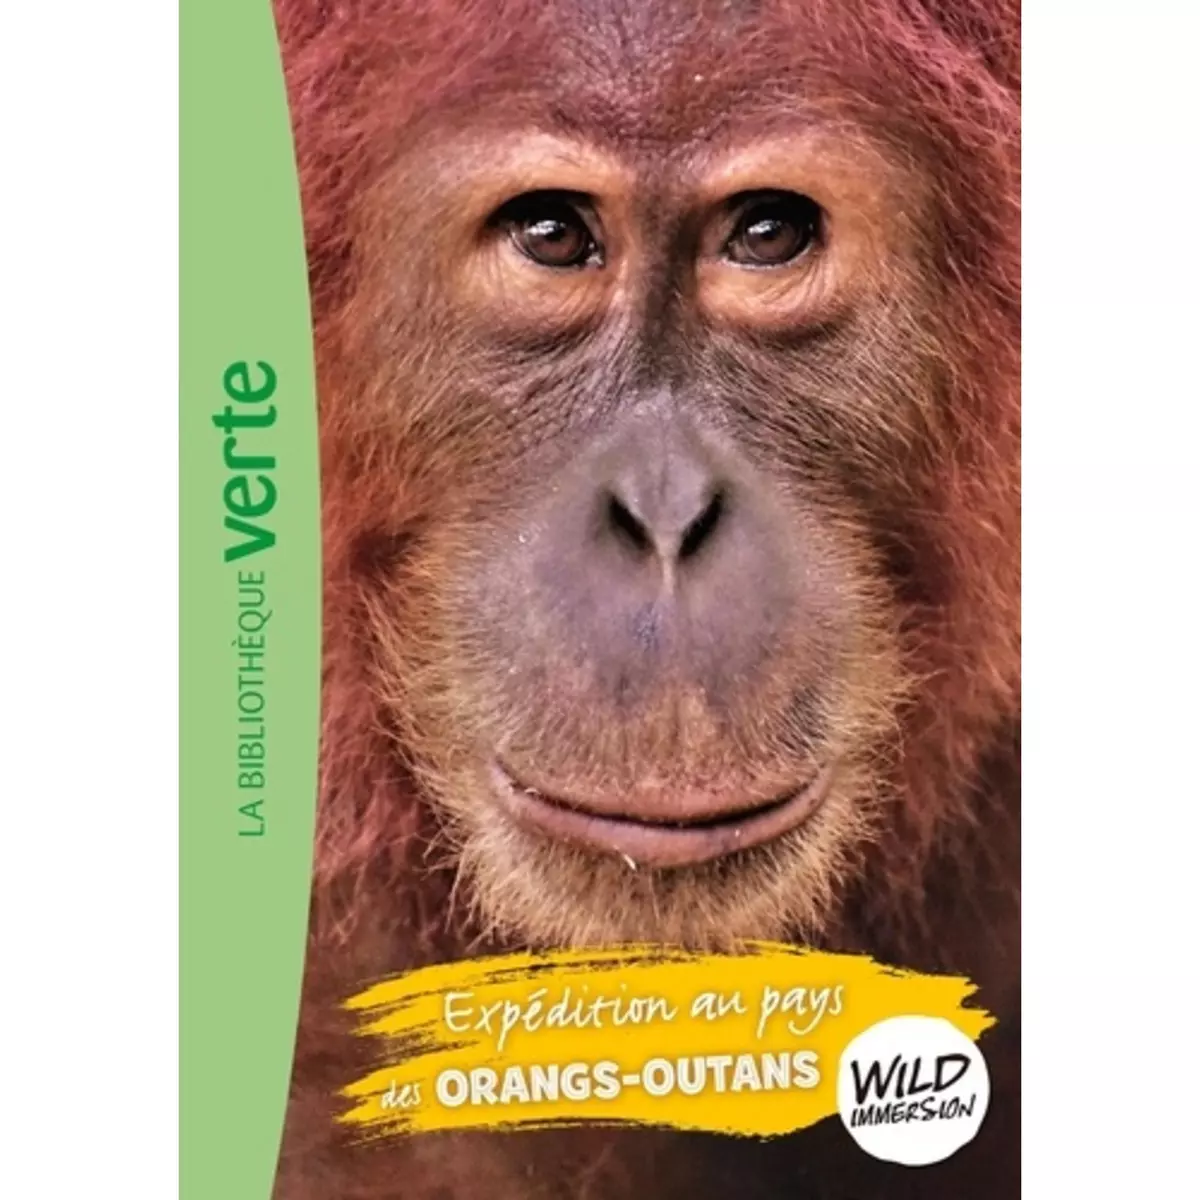  WILD IMMERSION TOME 3 : EXPEDITION AU PAYS DES ORANGS-OUTANS, Ruter Pascal